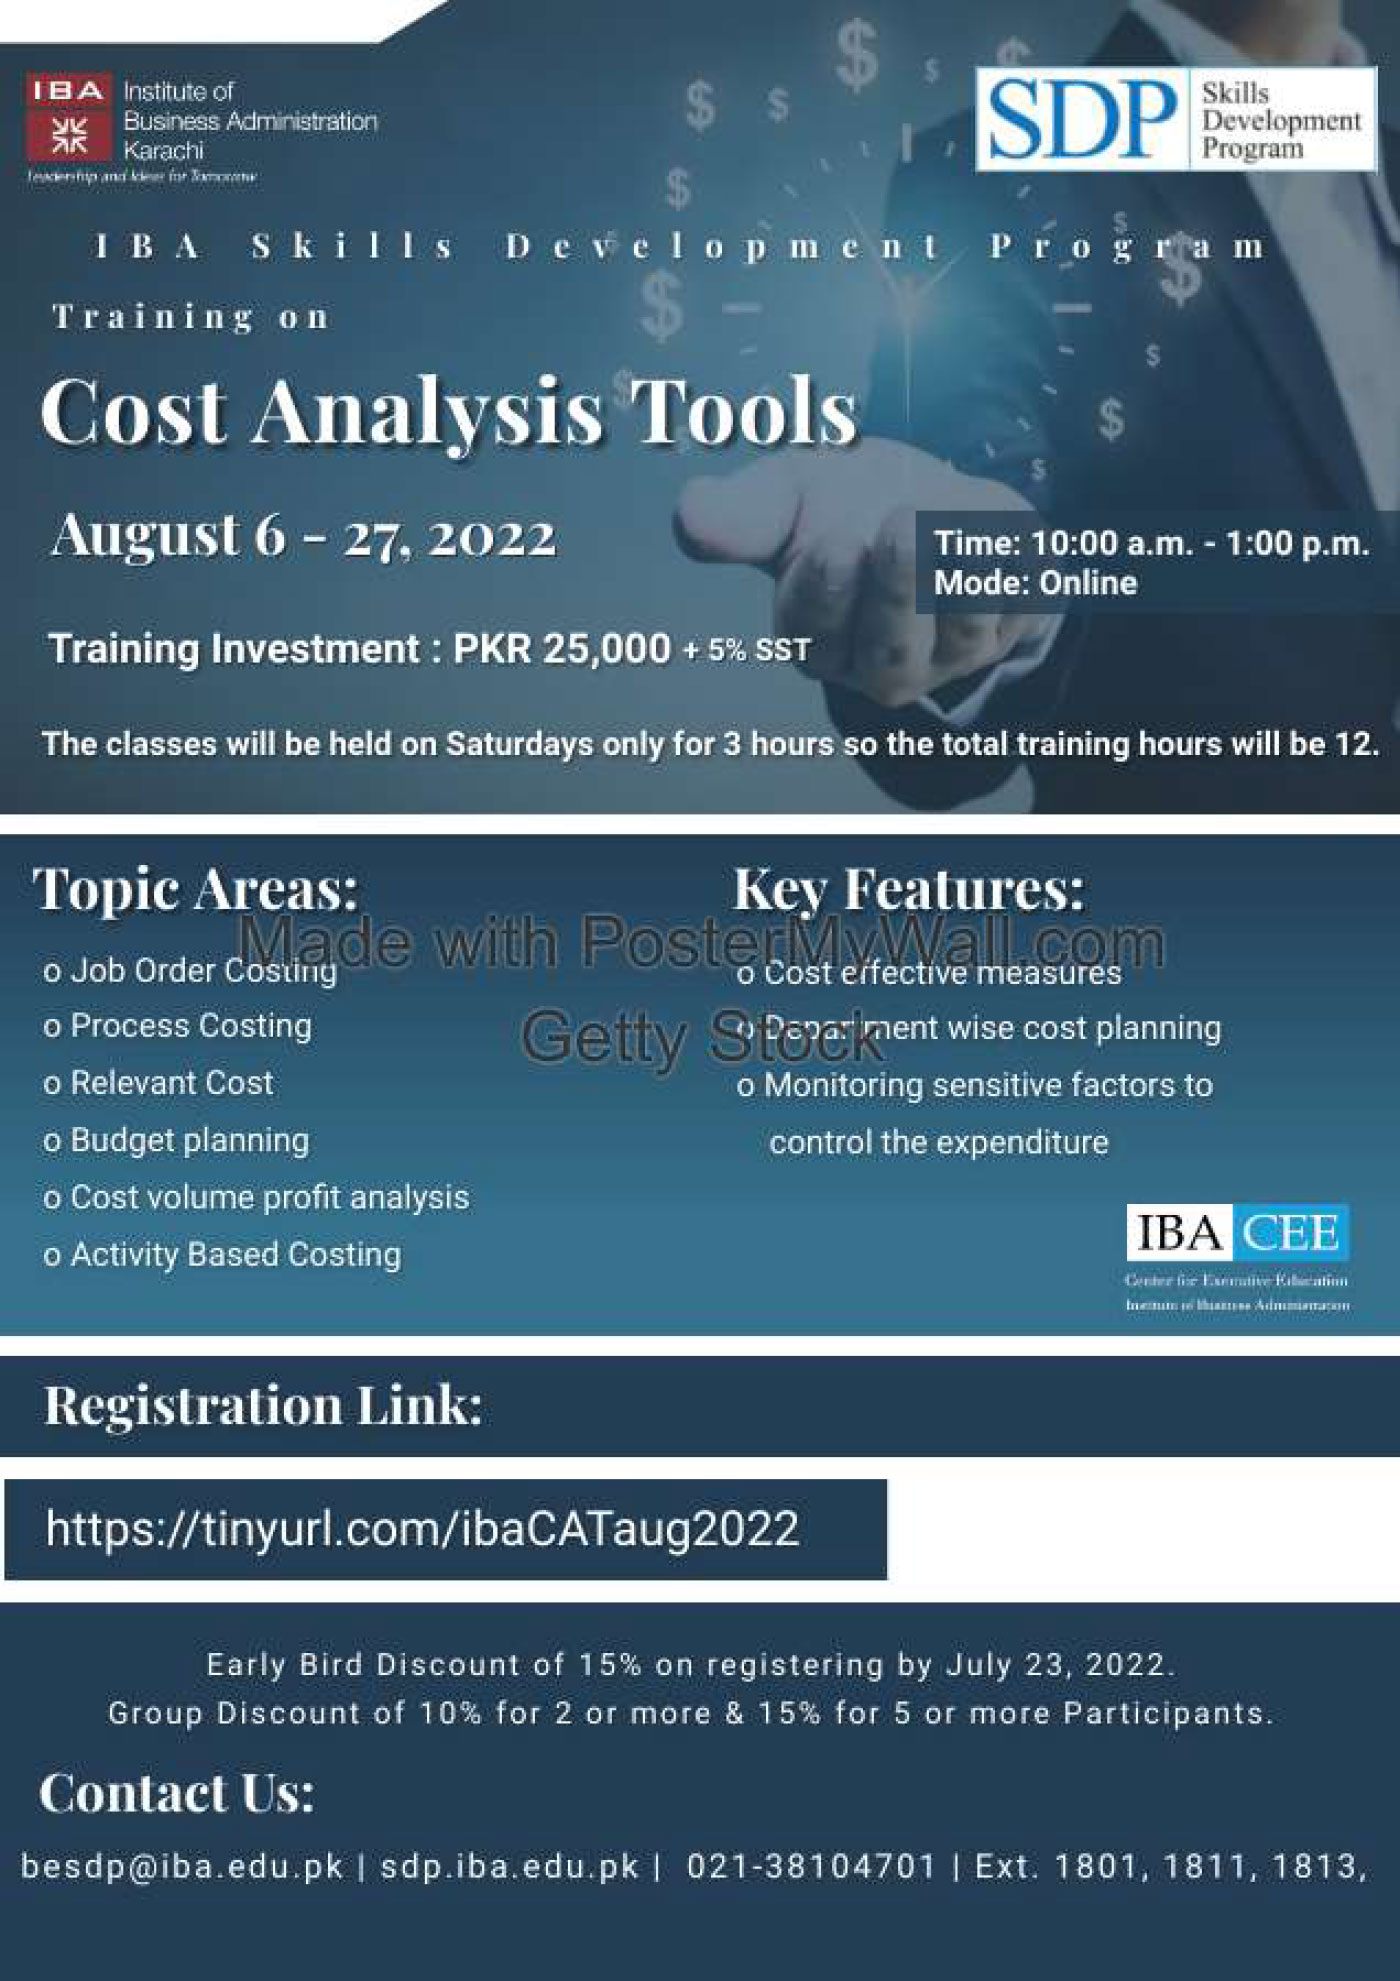 Cost Analysis Tools